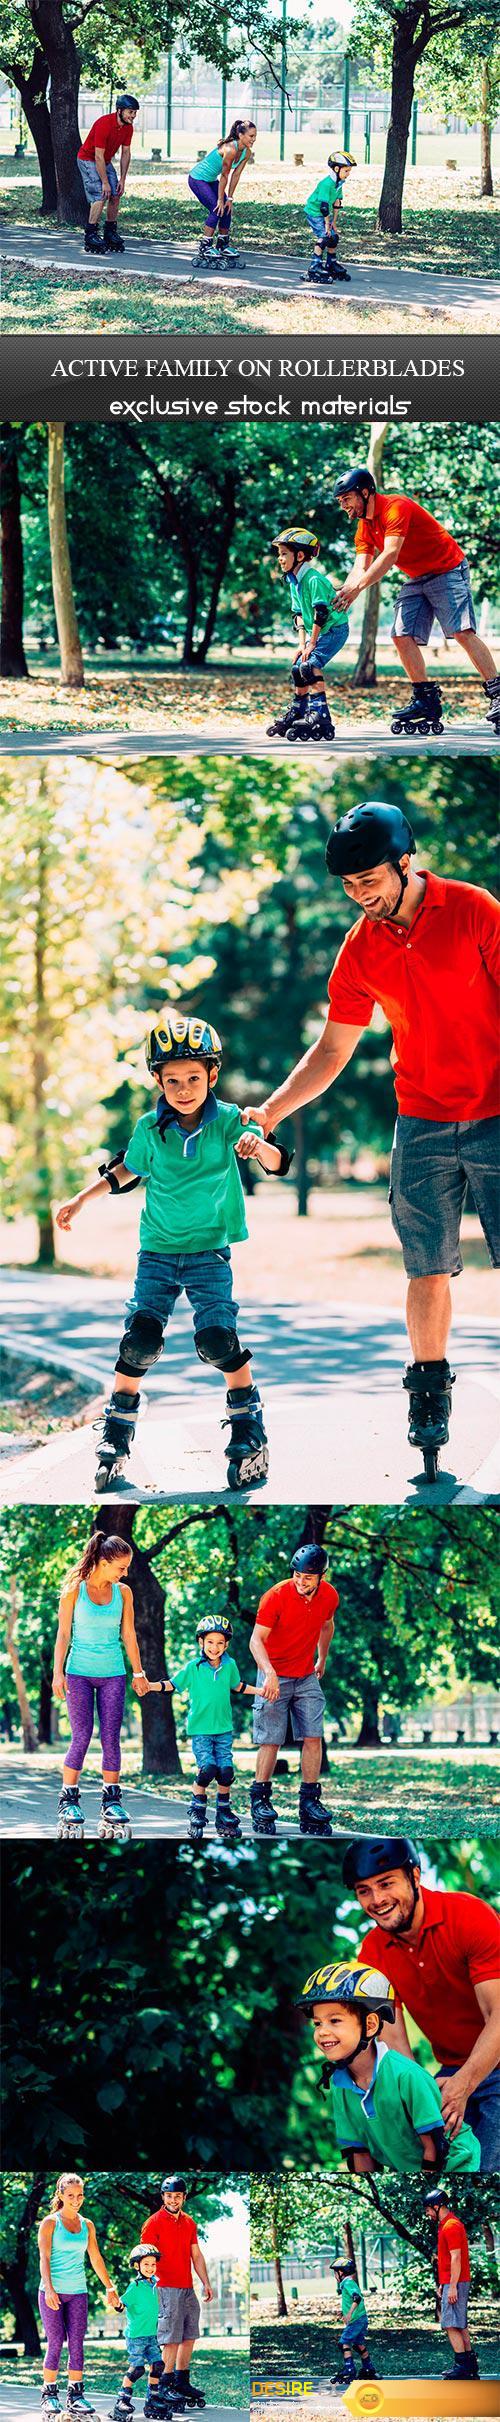 Active family on rollerblades - 7UHQ JPEG